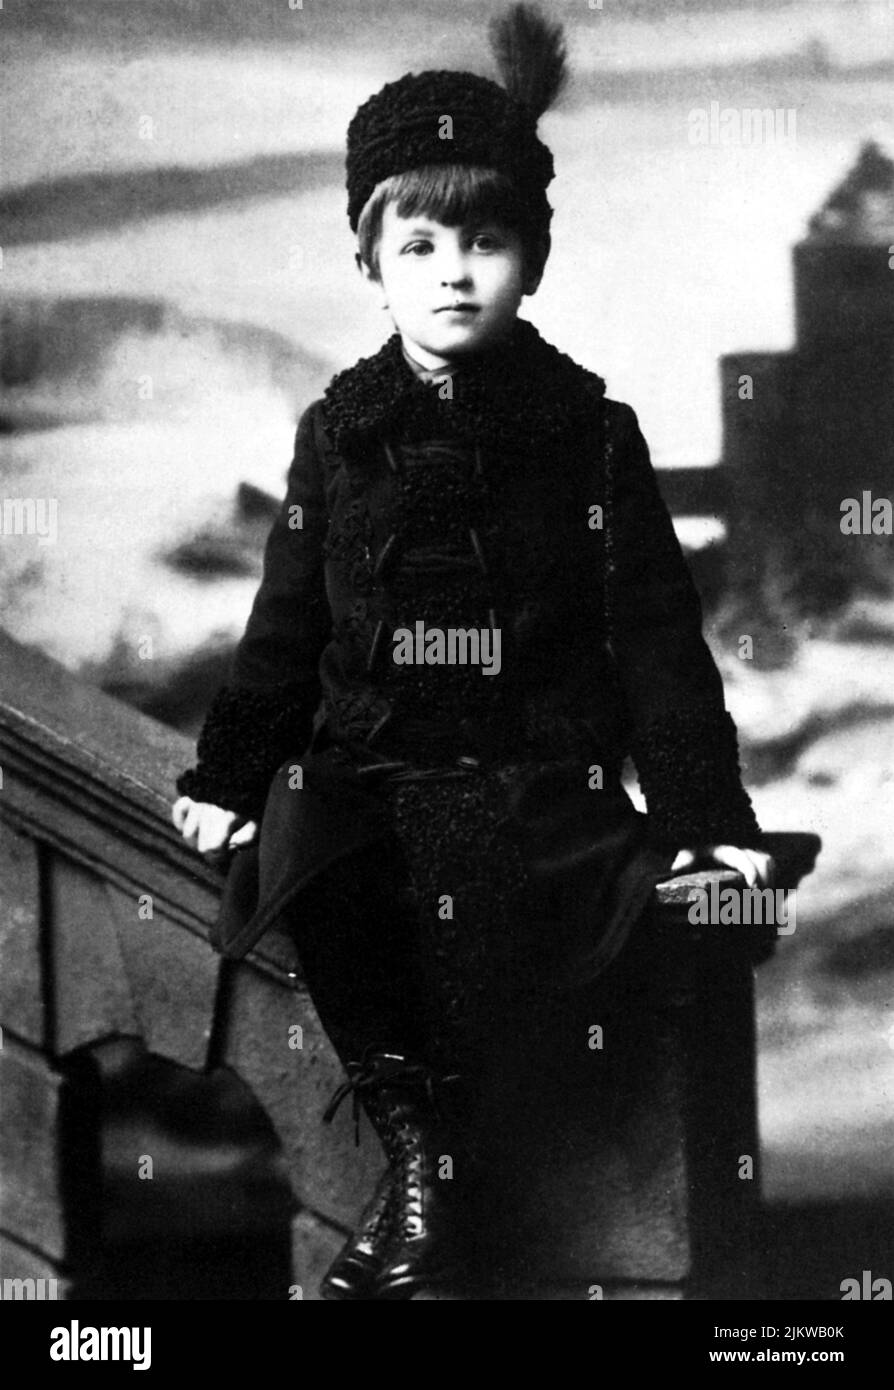 1891  : VYVYAN WILDE , aged five , one of two sons of  the celebrated irish writer and dramatist OSCAR WILDE ( 1854 - 1900 )  - SCRITTORE - LETTERATURA - LITERATURE - POET - POETA - POESIA - DRAMMATURGO - playwriter - play-writer - TEATRO - THEATER - THEATRE  - POETRY   - GAY - HOMOSEXUALITY - HOMOSEXUAL - omosessuale - omosessualità   - bambino - bambini - child - children   ----  Archivio GBB Stock Photo